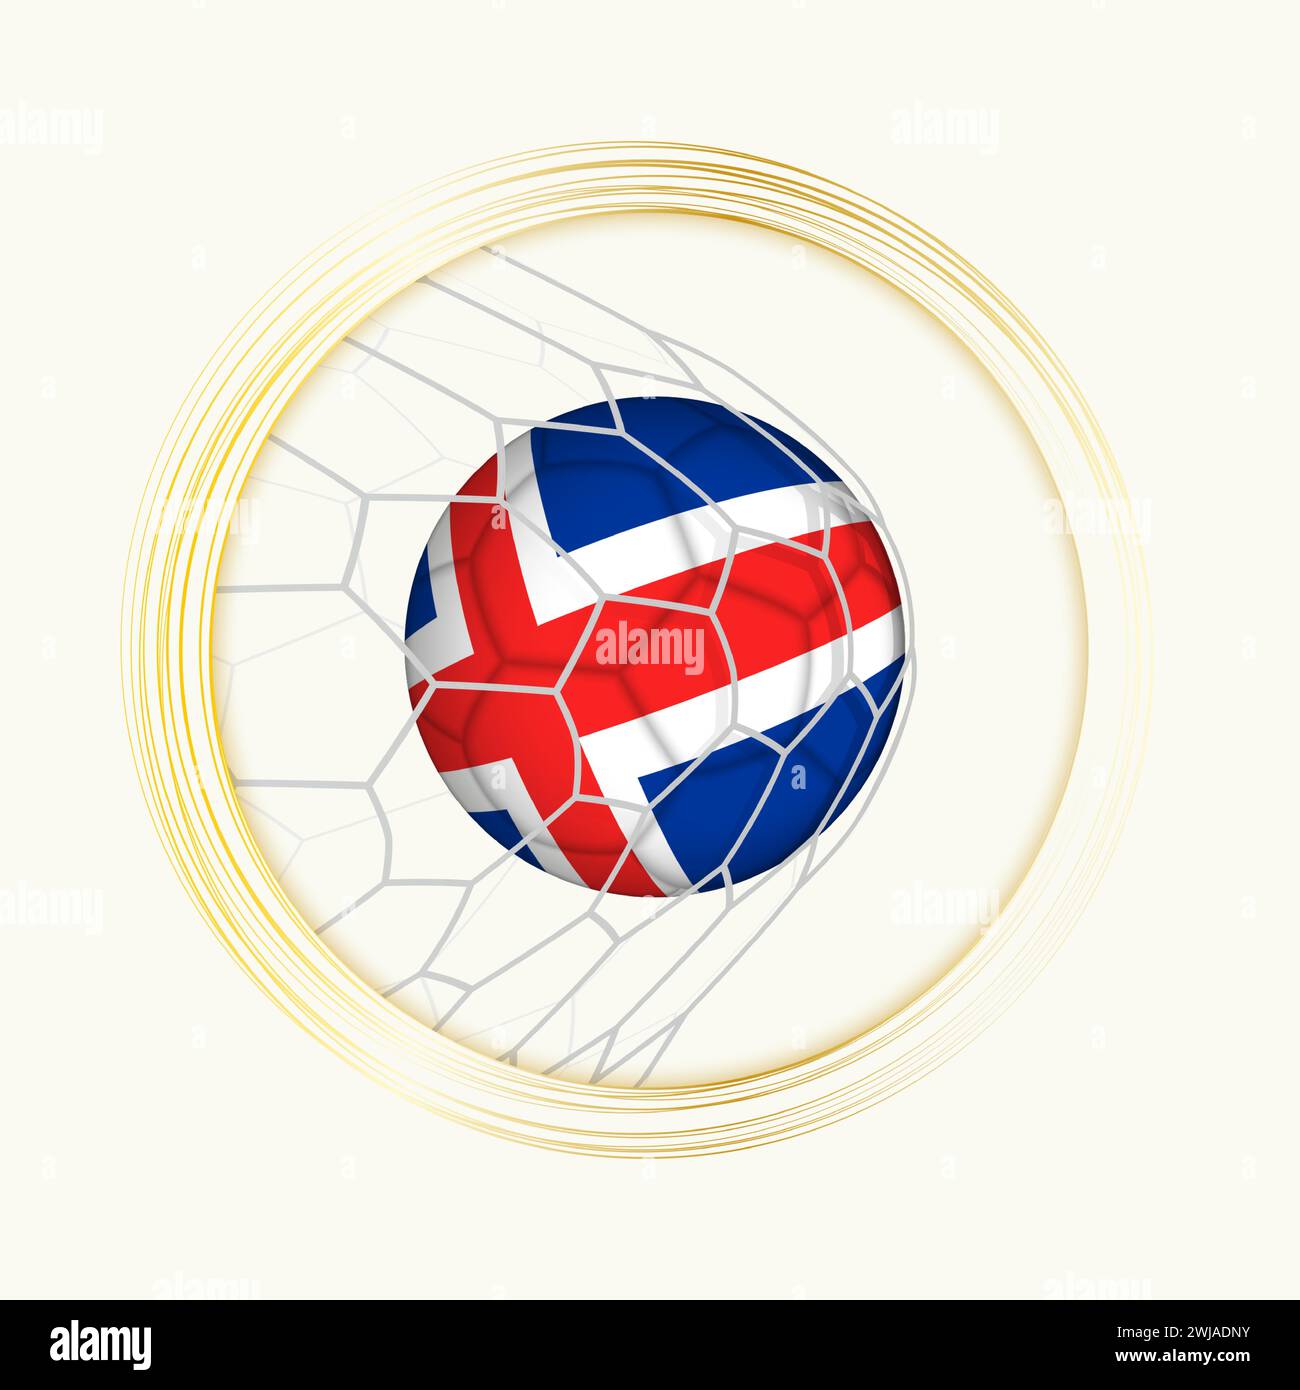 Iceland scoring goal, abstract football symbol with illustration of Iceland ball in soccer net. Vector sport illustration. Stock Vector